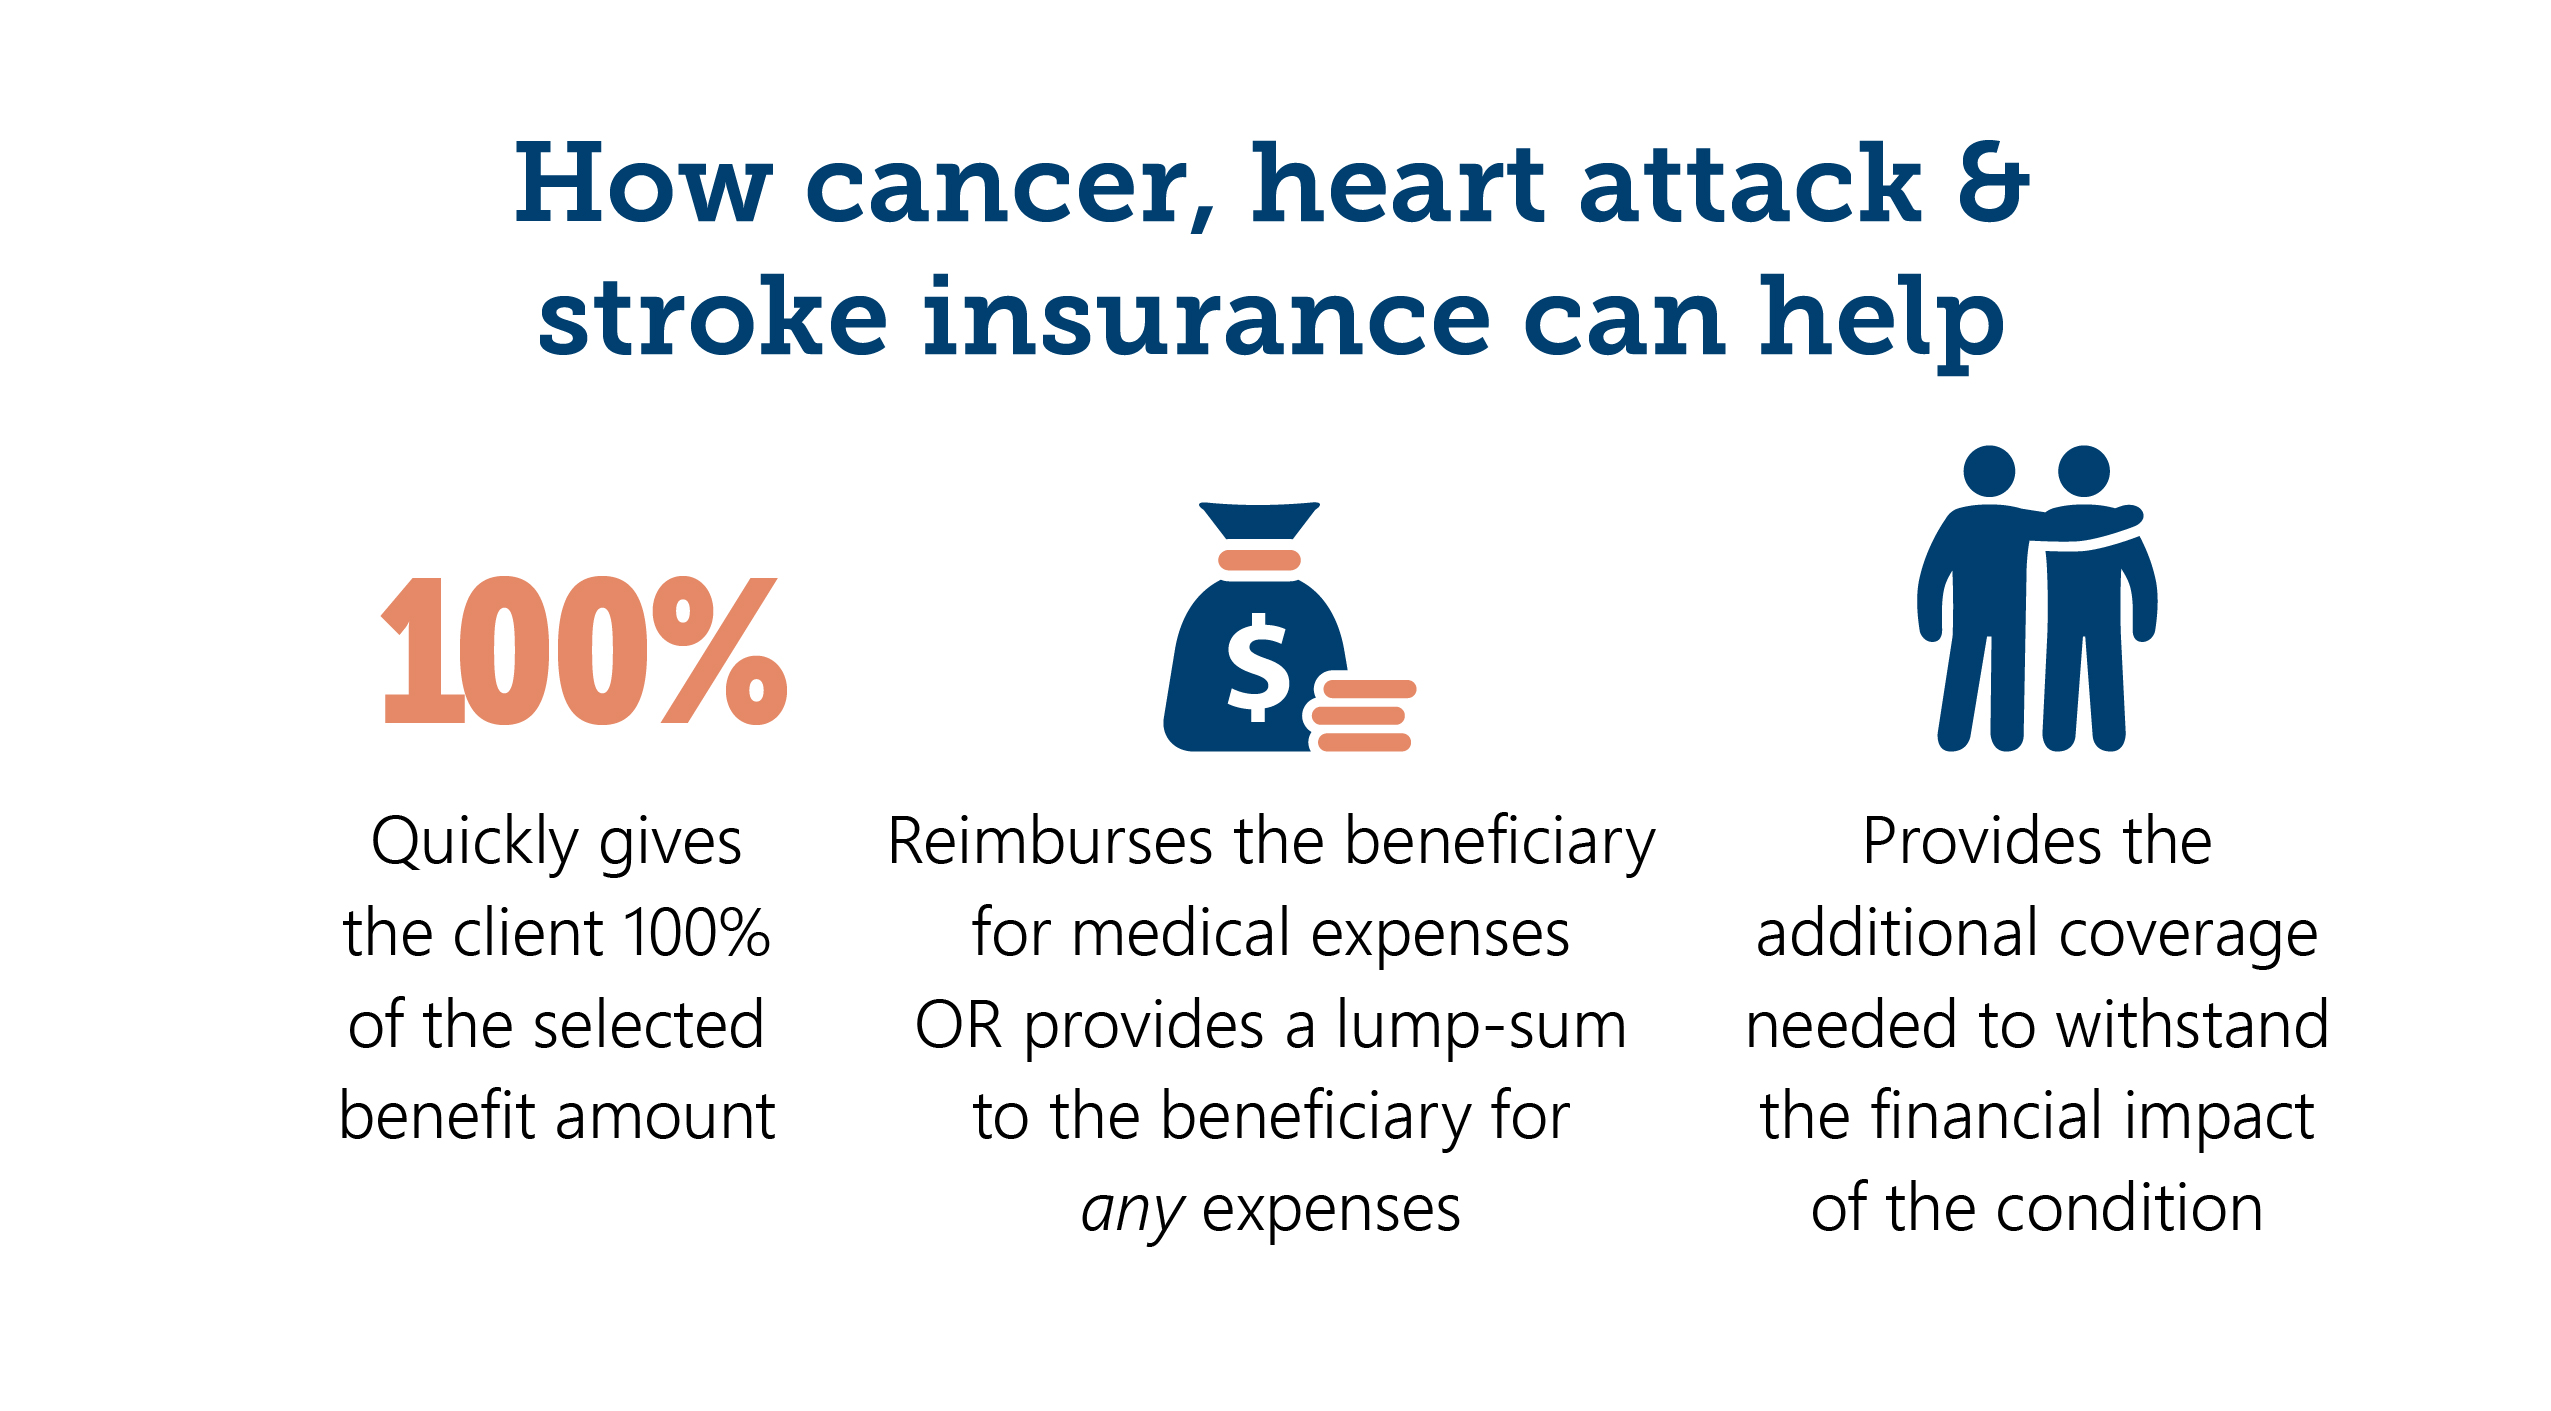 How Cancer, Heart Attack and Stroke Insurance Can Help